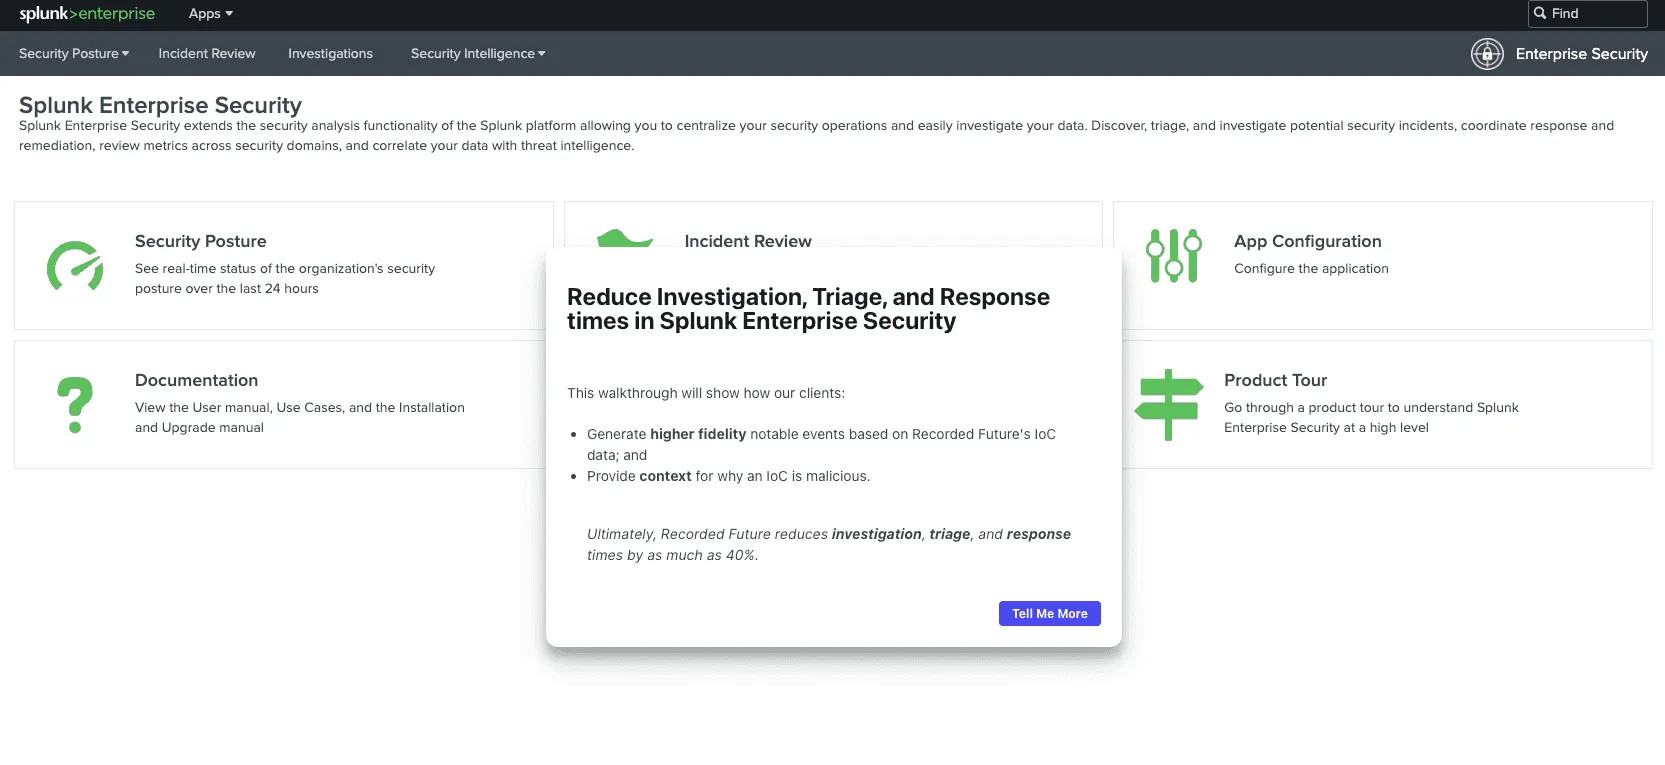 Reduce Investigation, Triage, and Response times in Splunk Enterprise Security